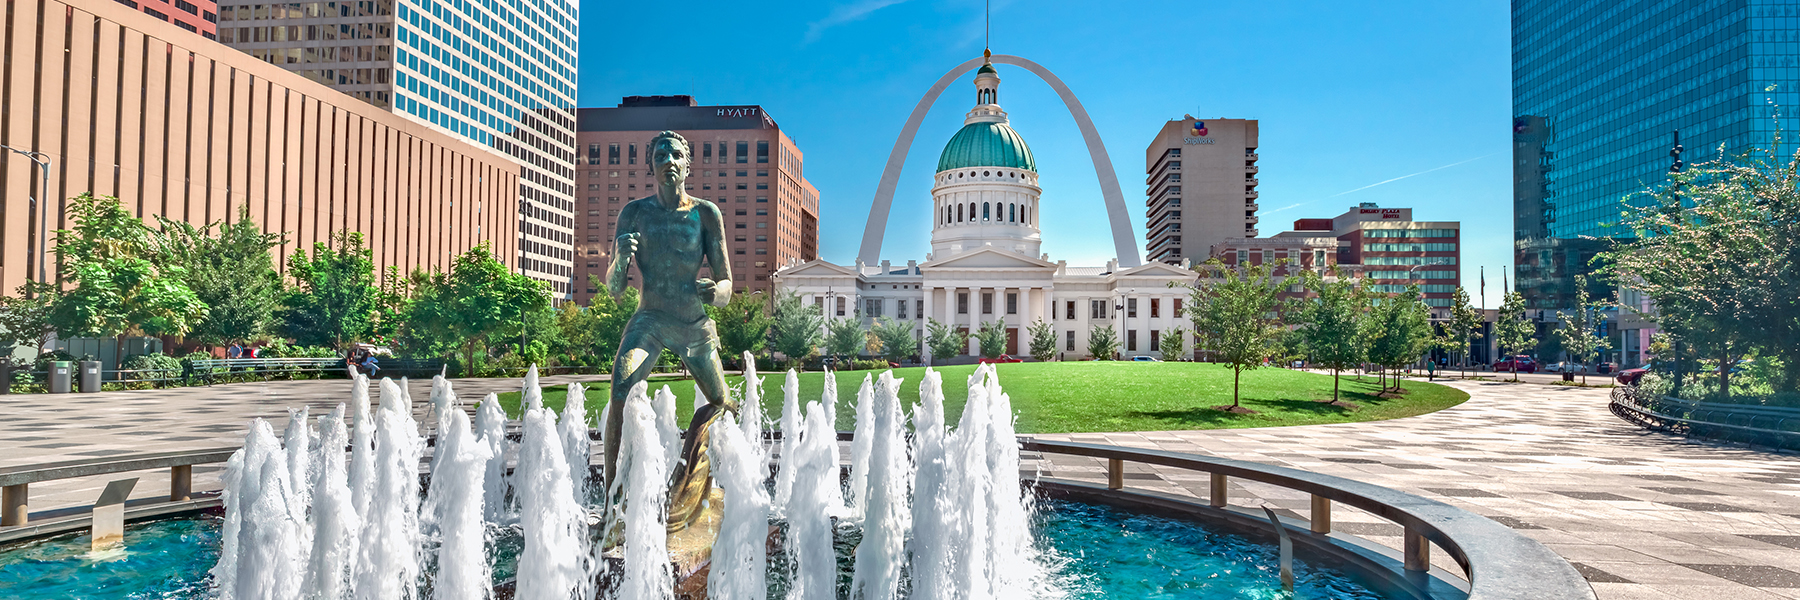 Kiener Plaza with the Old Courthouse and Gateway Arch in the background in downtown St. Louis.